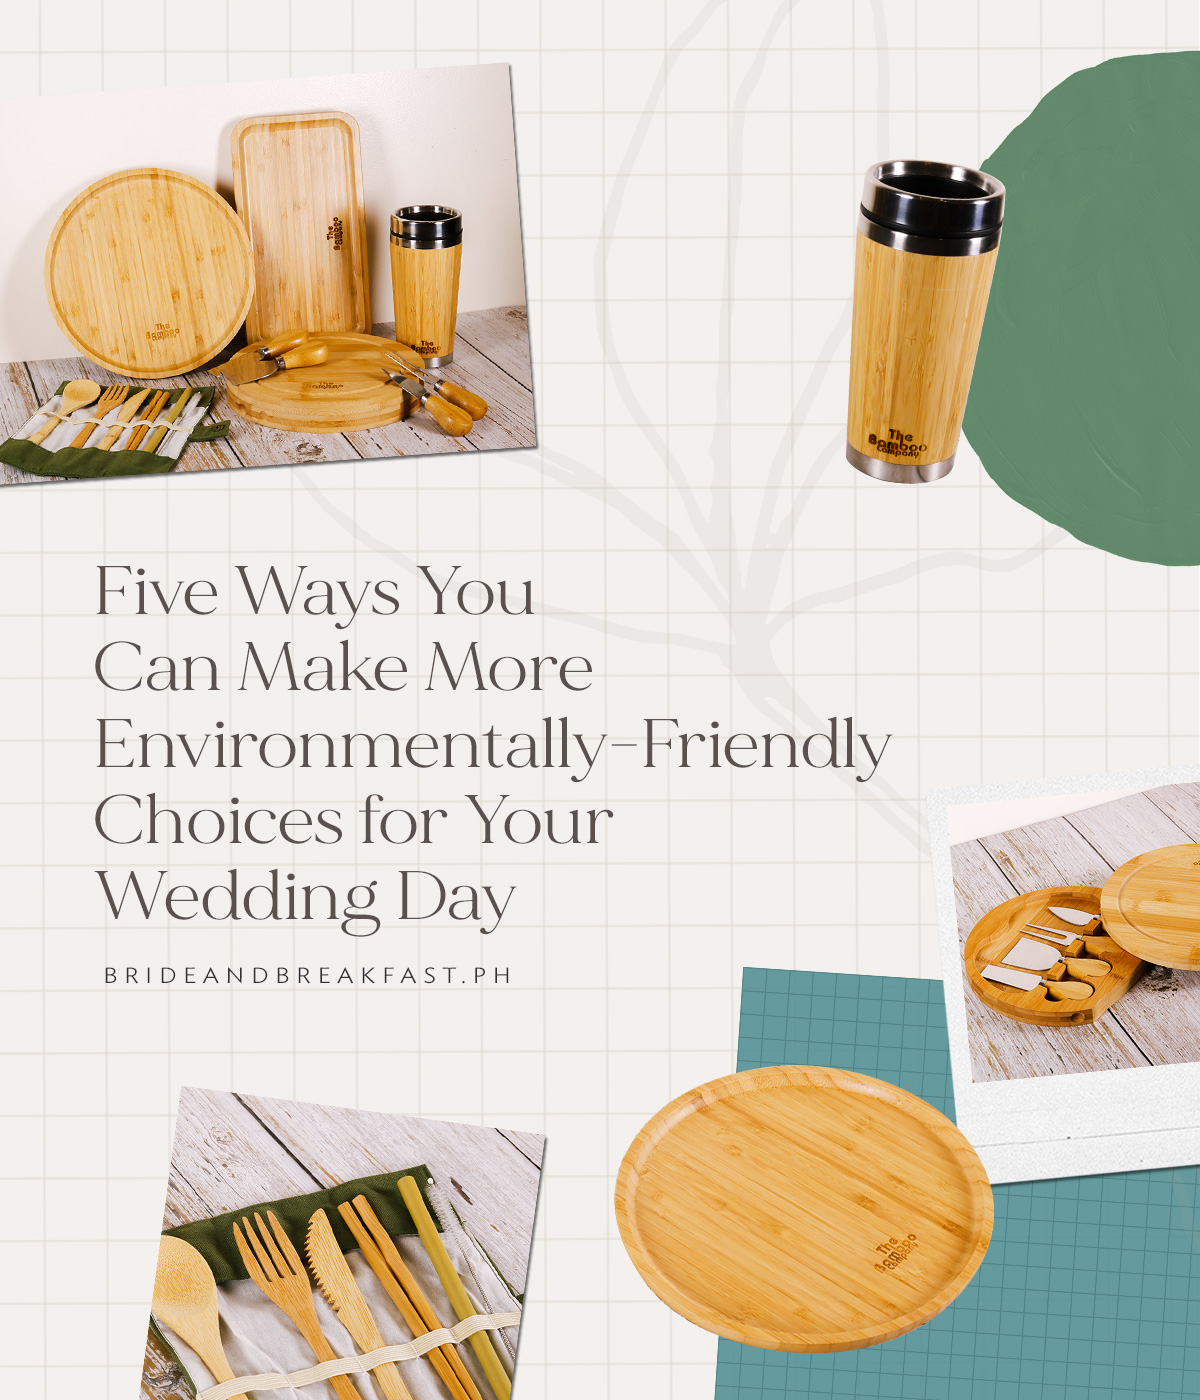 Five Ways You Can Make More Environmentally-Friendly Choices for Your Wedding Day